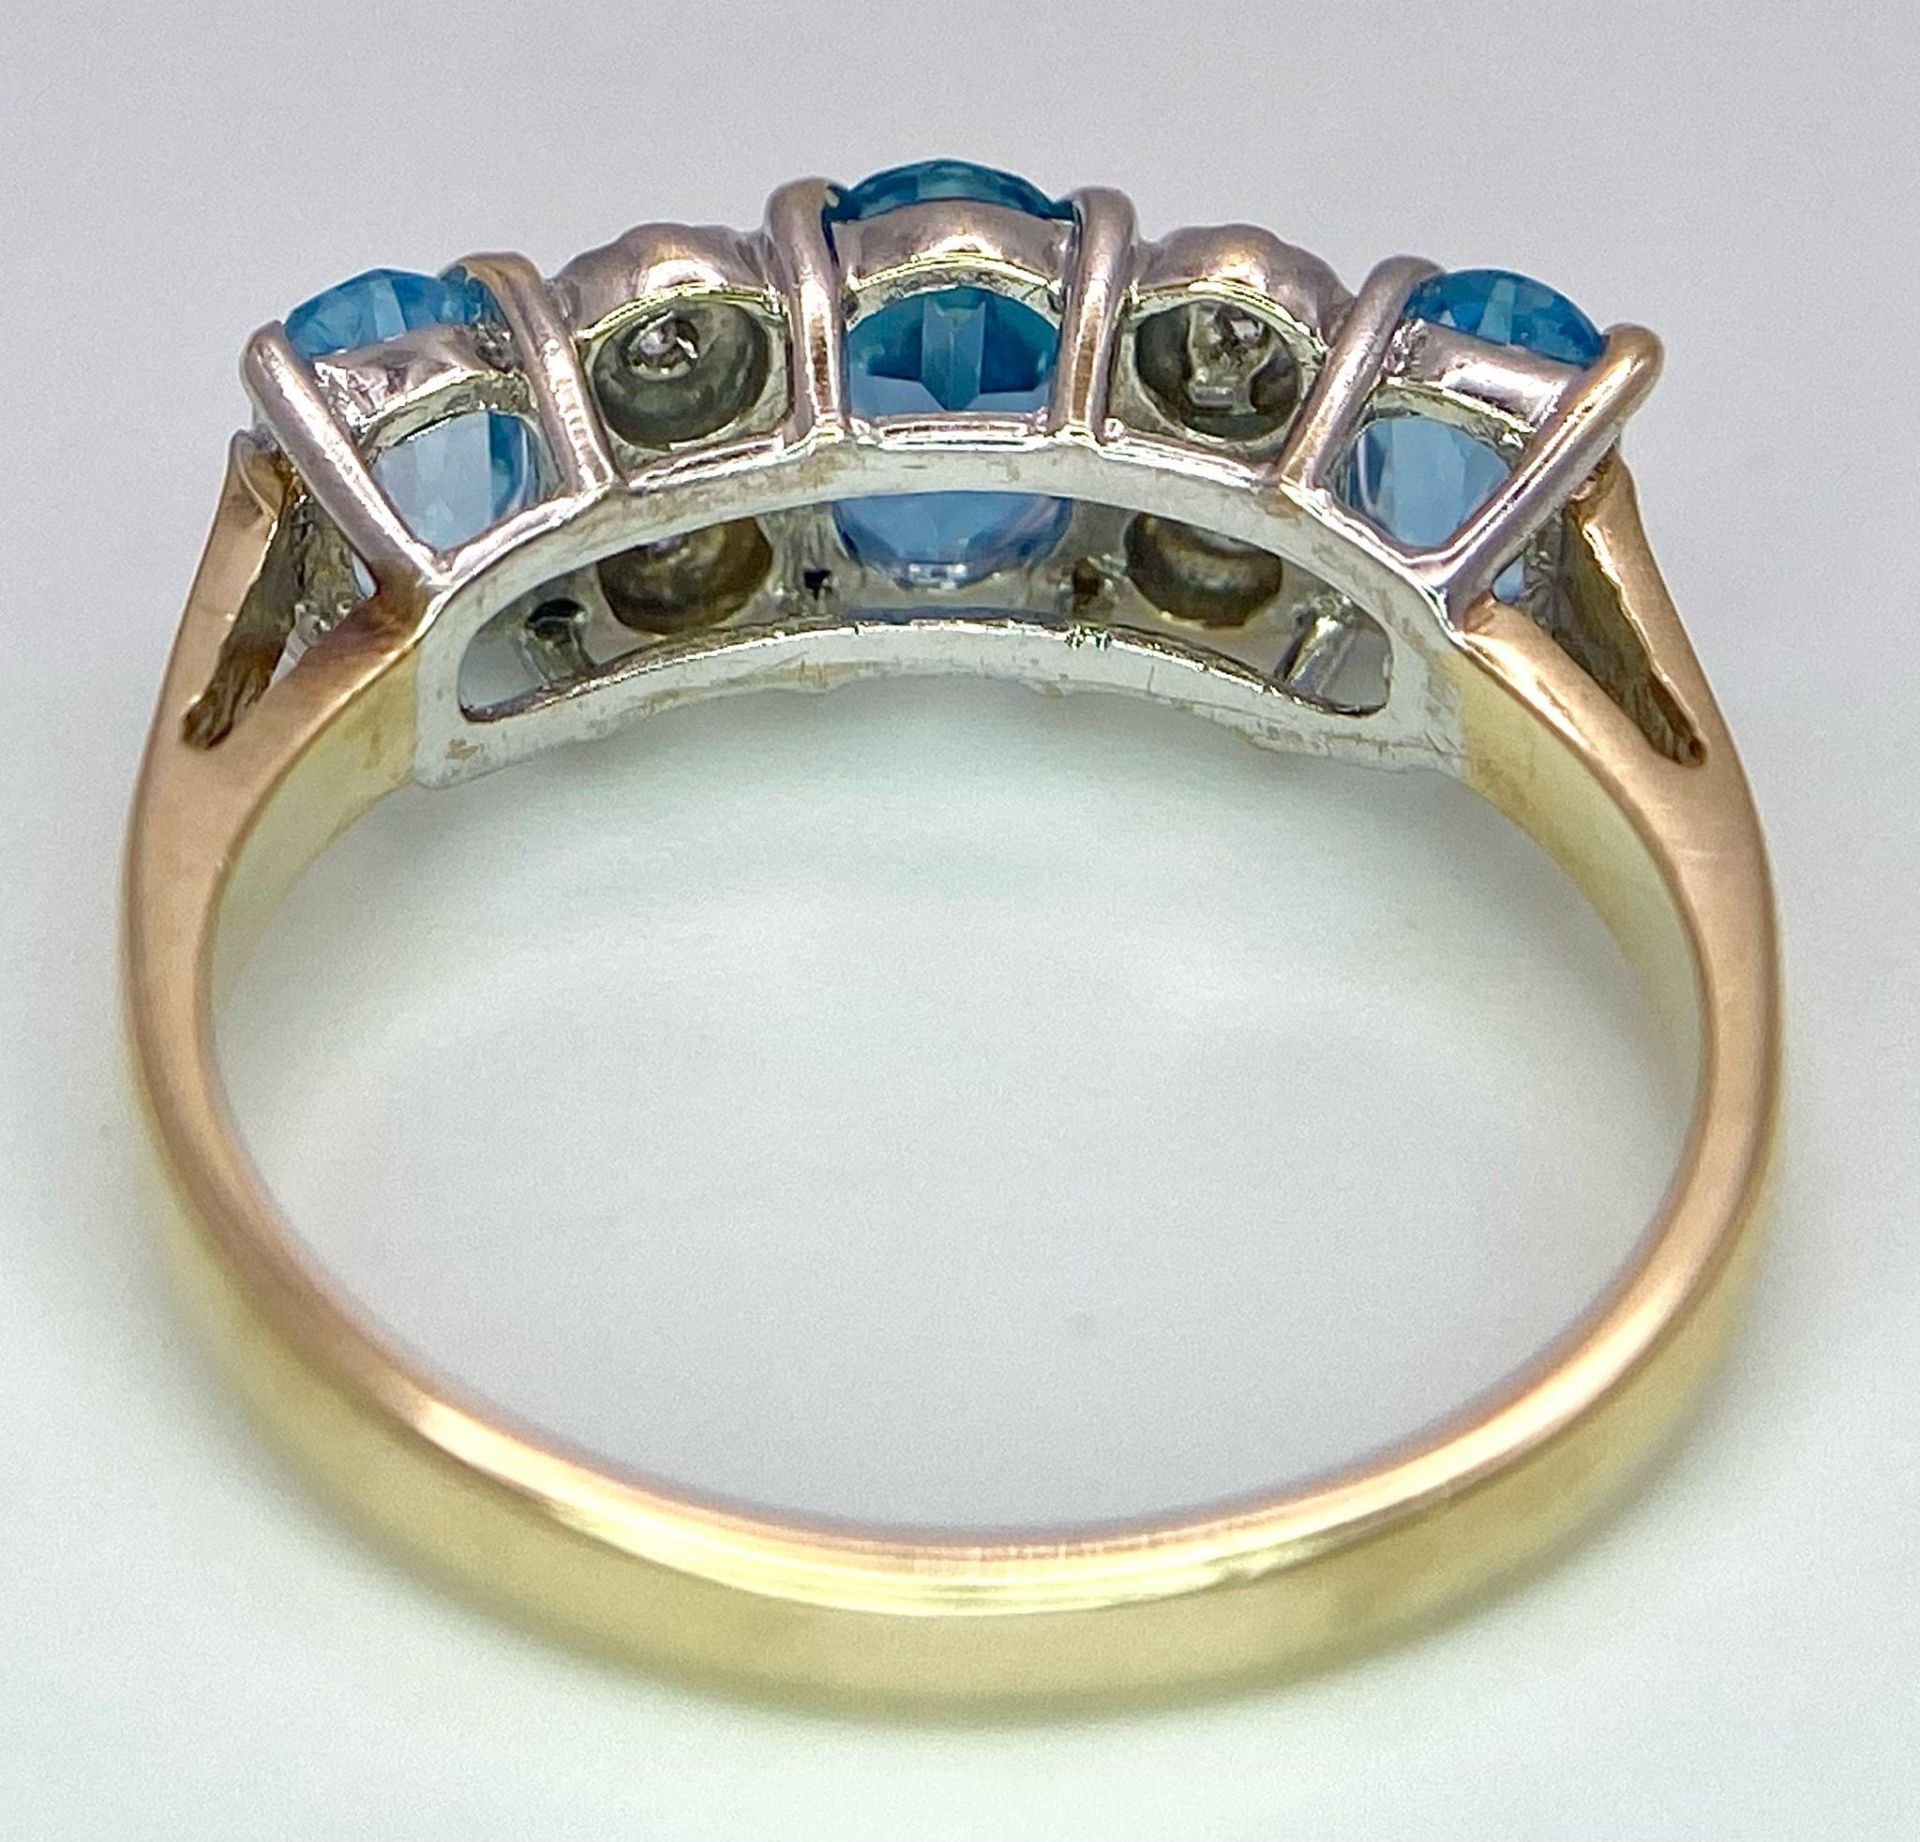 A 9K Yellow Gold Diamond and London Blue Topaz Ring. Size J, 2.1g total weight. Ref: 8410 - Image 5 of 6